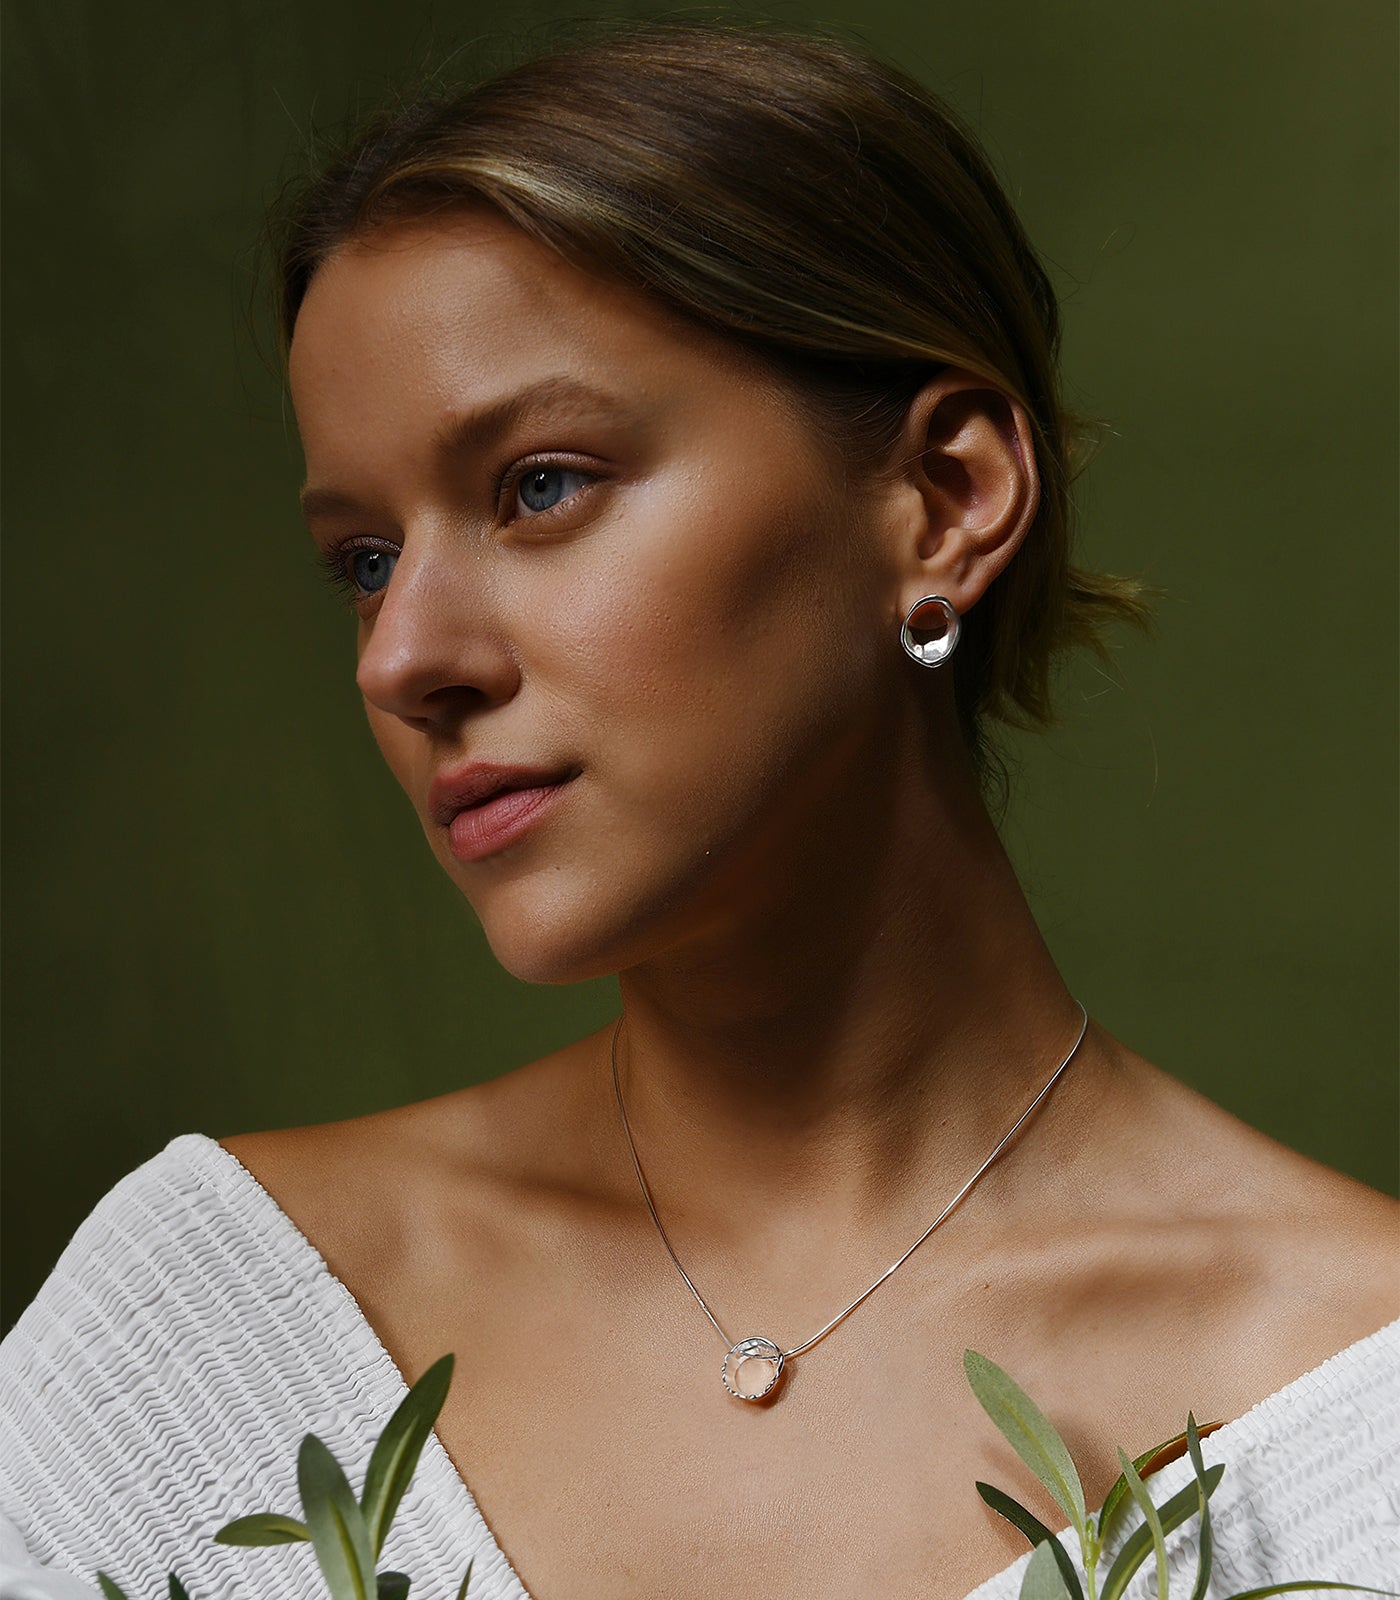 A model wearing a sterling silver necklace with an irregular circle shaped pendant, reflective of waters movements.